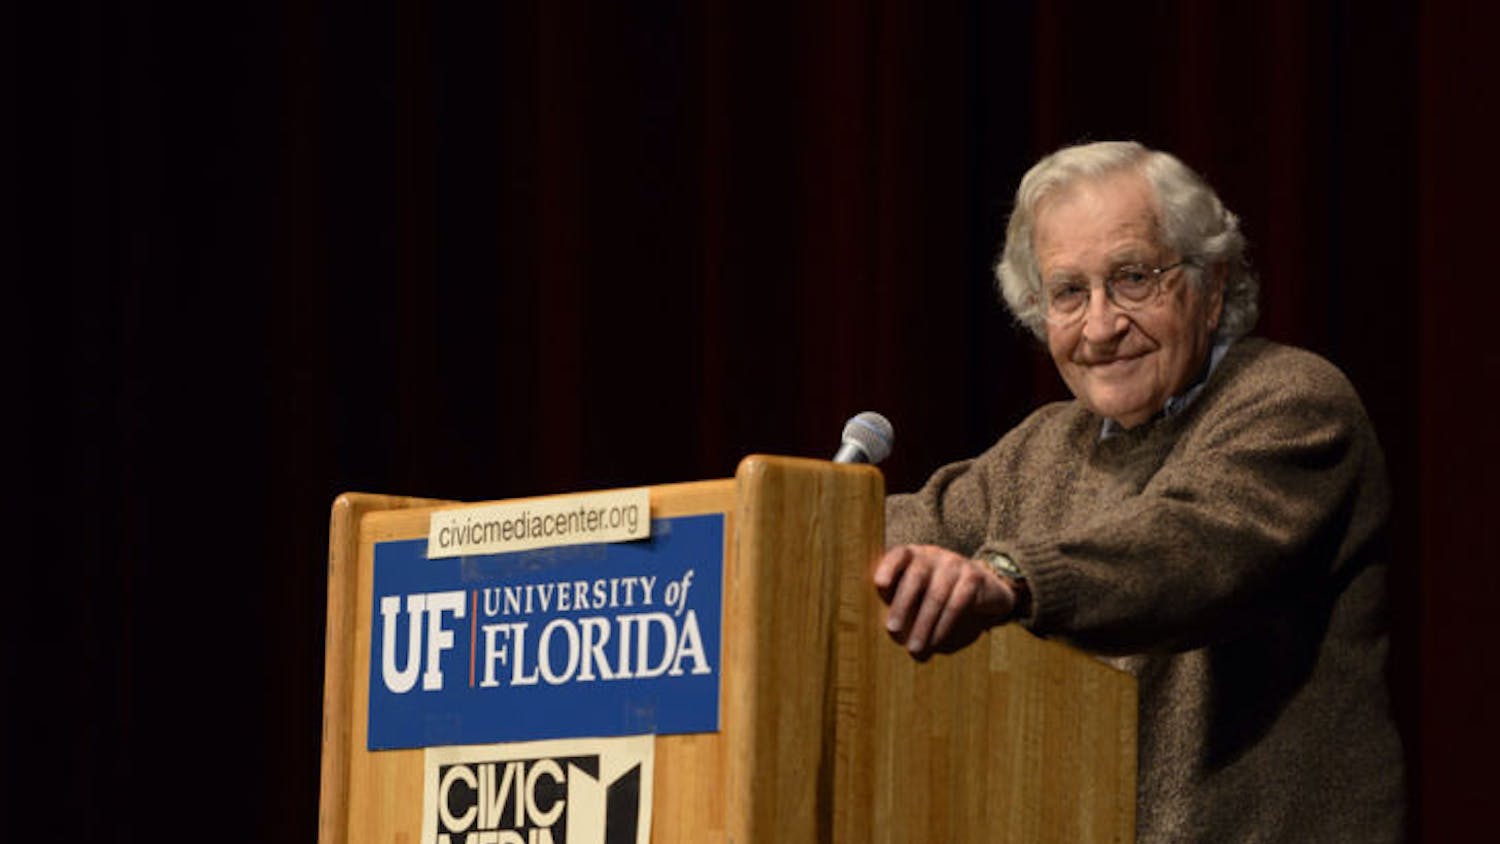 Noam Chomsky, a world-renowned linguist, philosopher, cognitive scientist and logician, delivers a special guest lecture Tuesday evening at the Phillips Center for the Performing Arts.